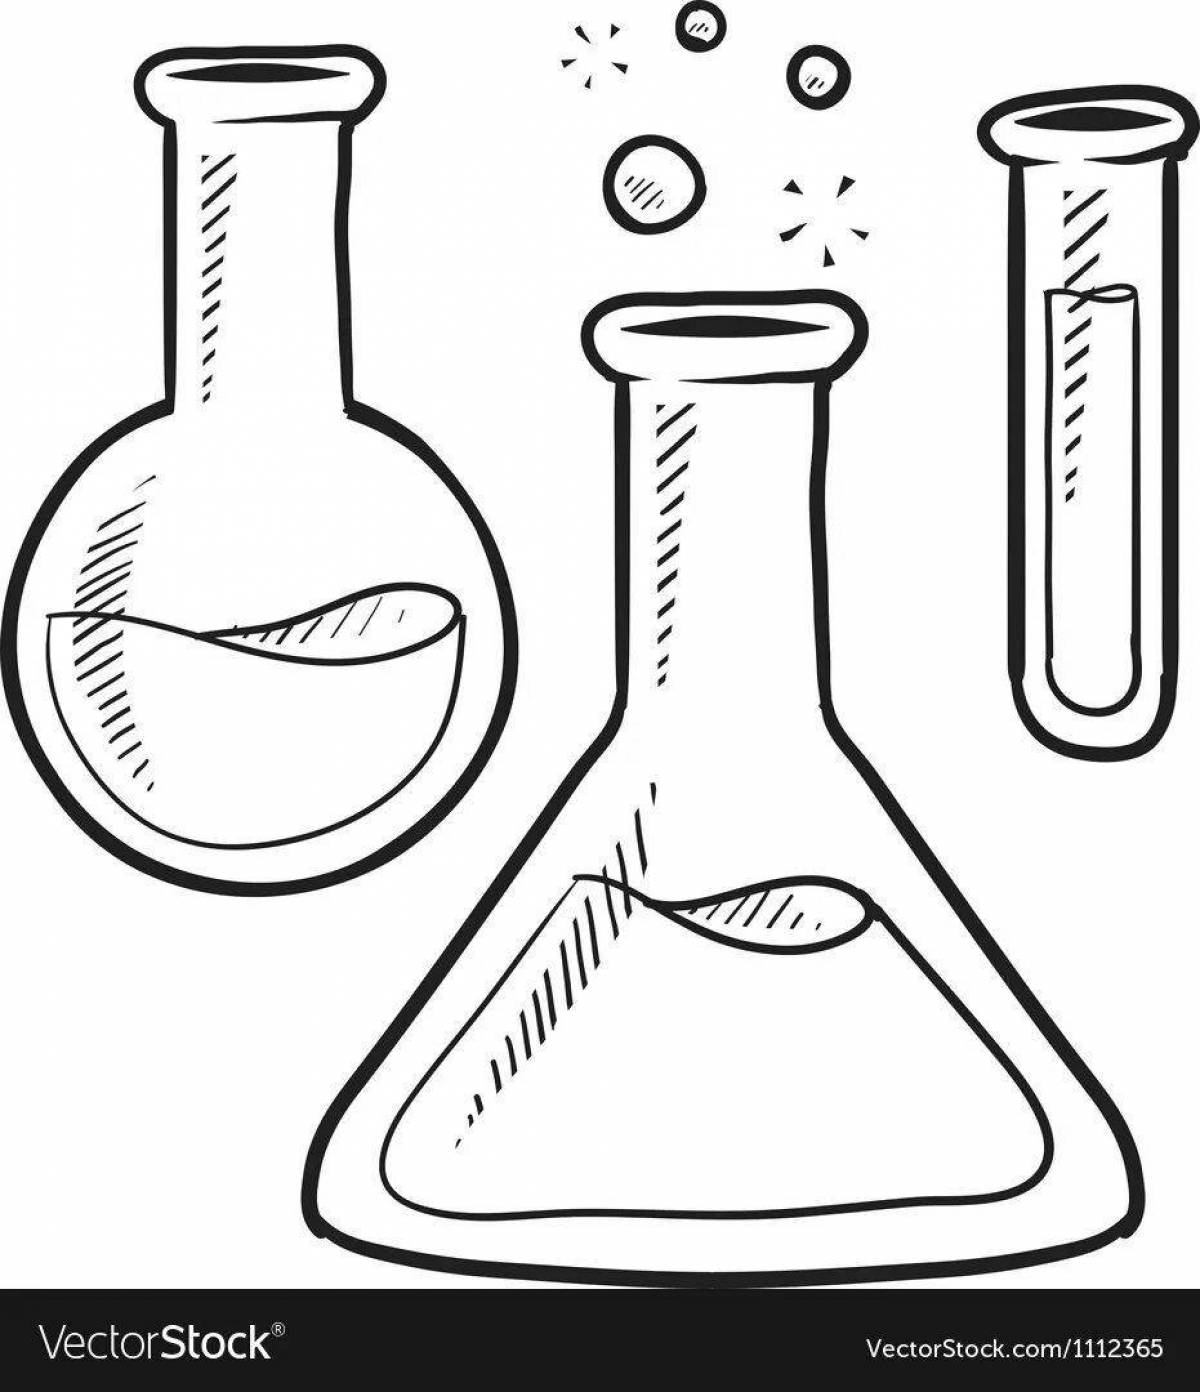 Bright science coloring book for kids